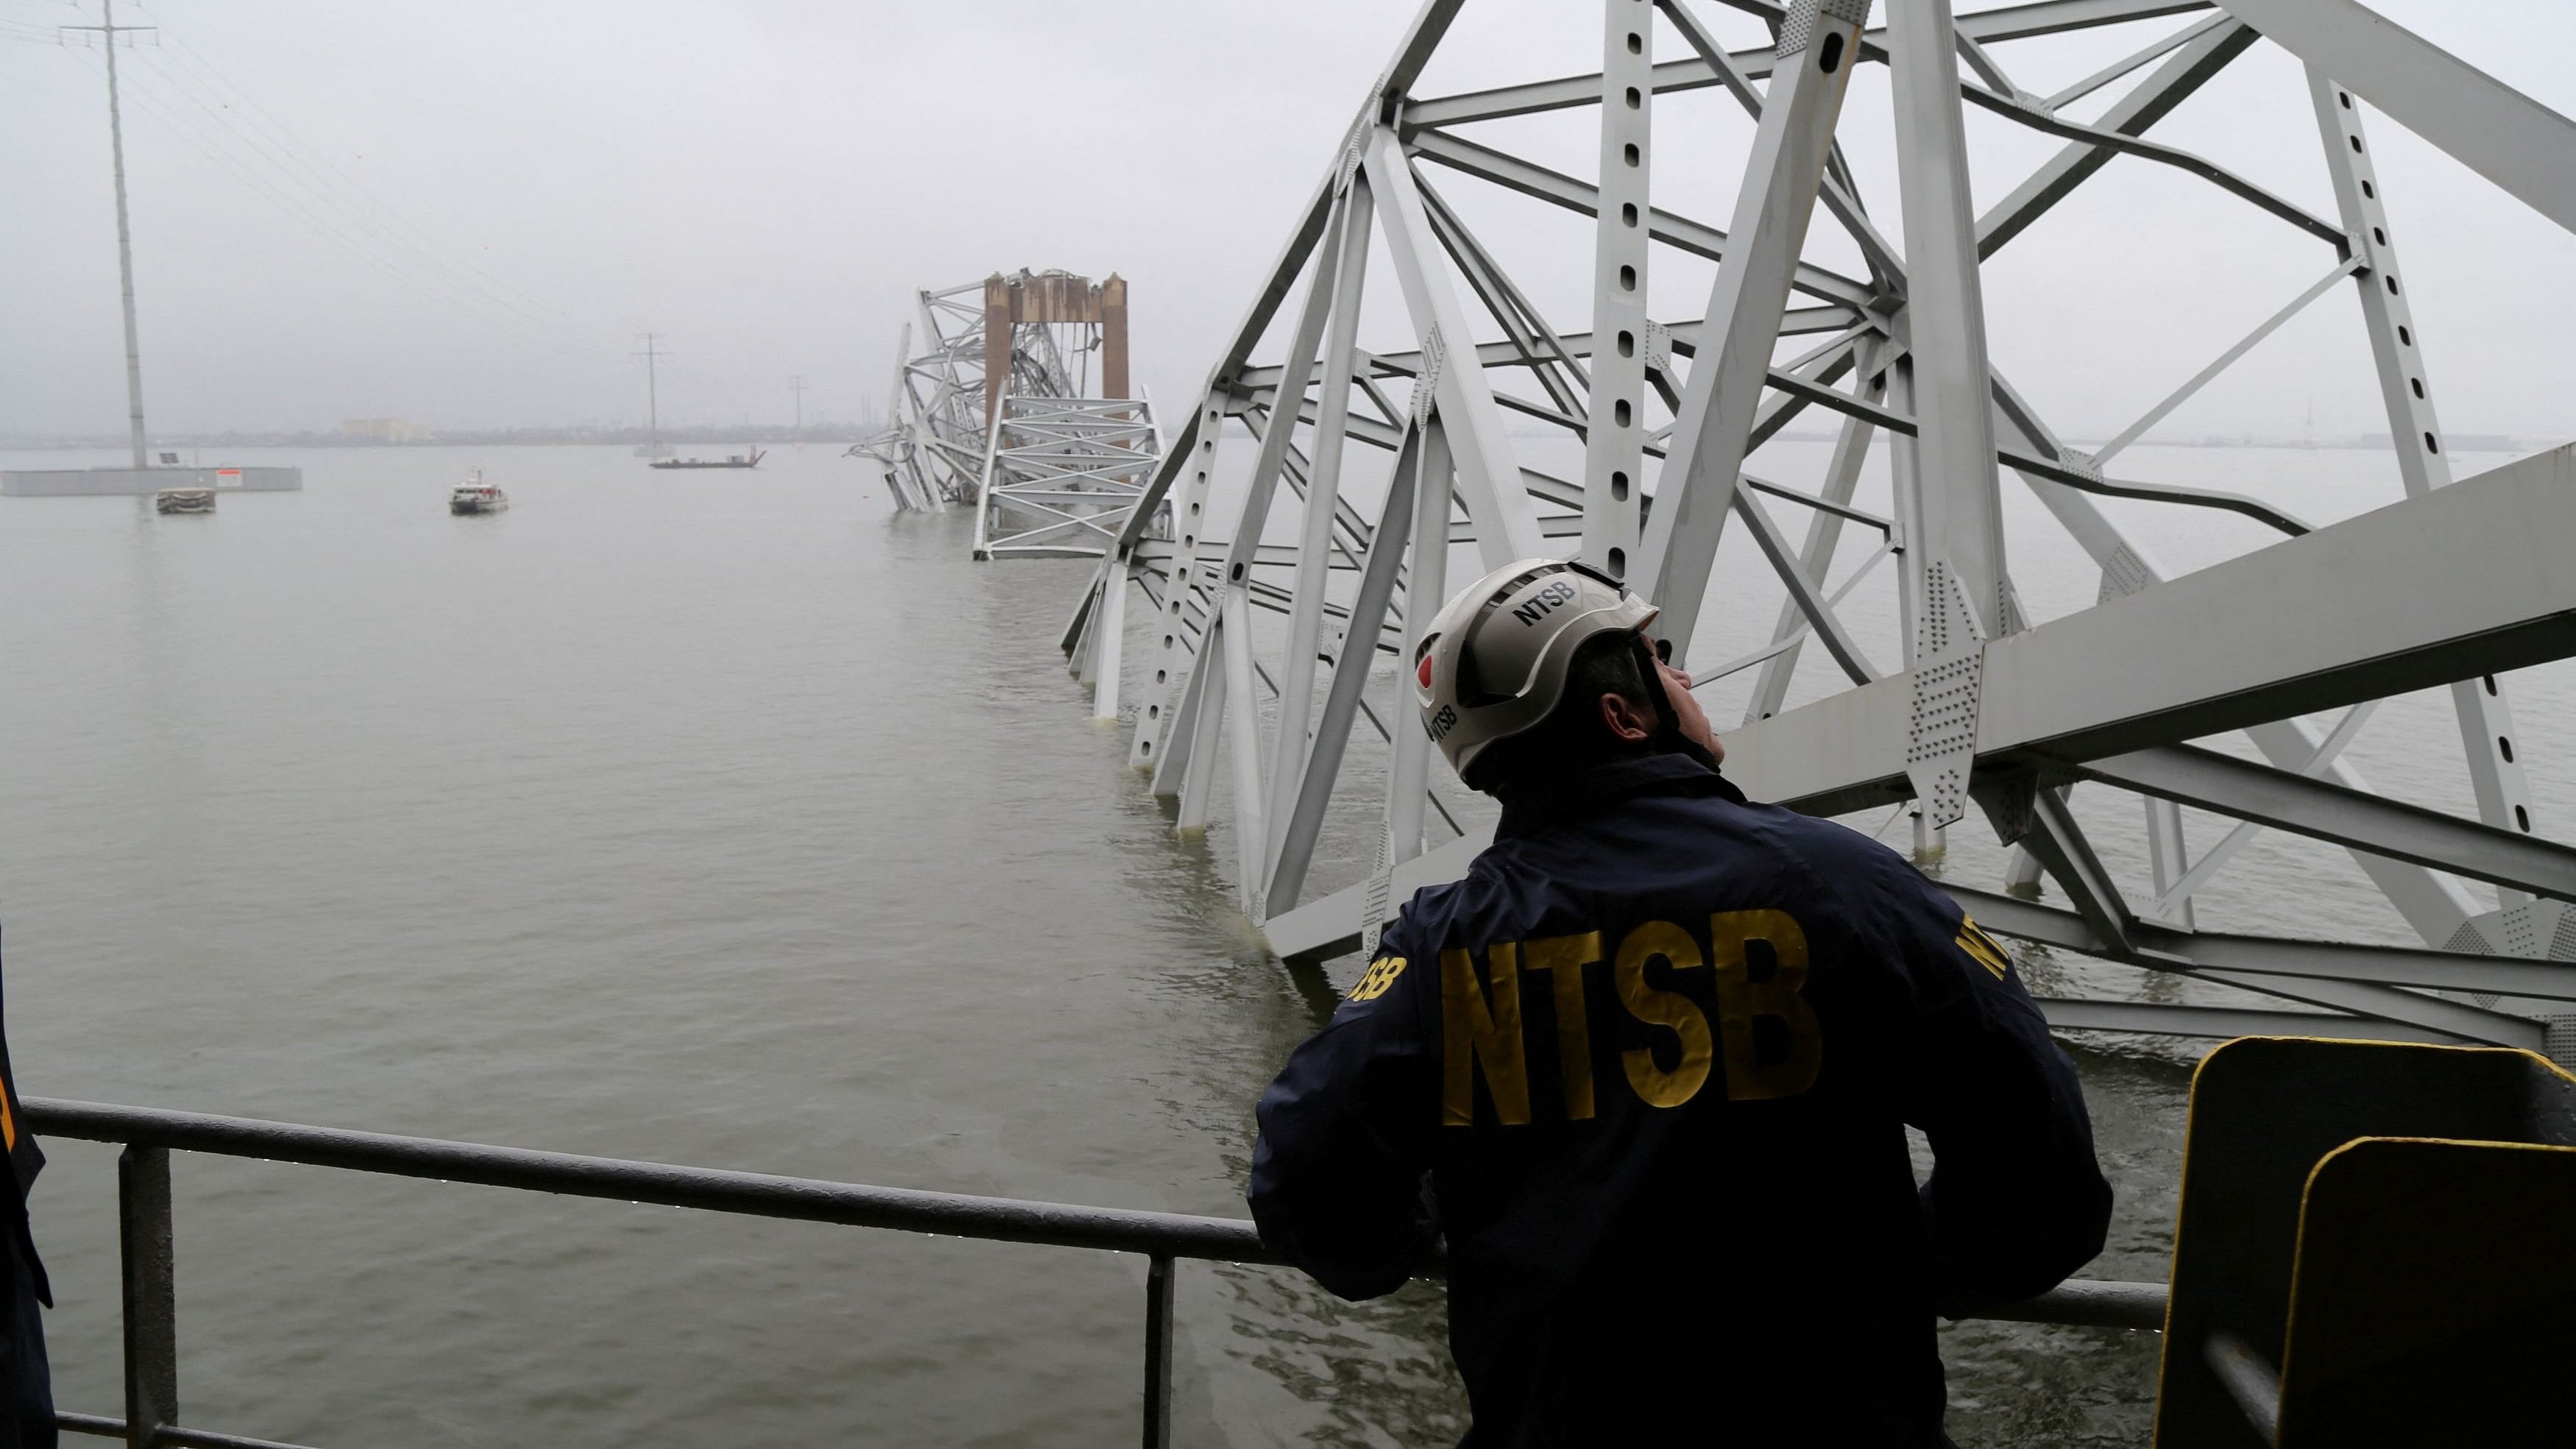 <div class="paragraphs"><p>A National Transportation Safety Board (NTSB) worker looks on at the cargo vessel Dali, which struck and collapsed the Francis Scott Key Bridge, in Baltimore, Maryland </p></div>